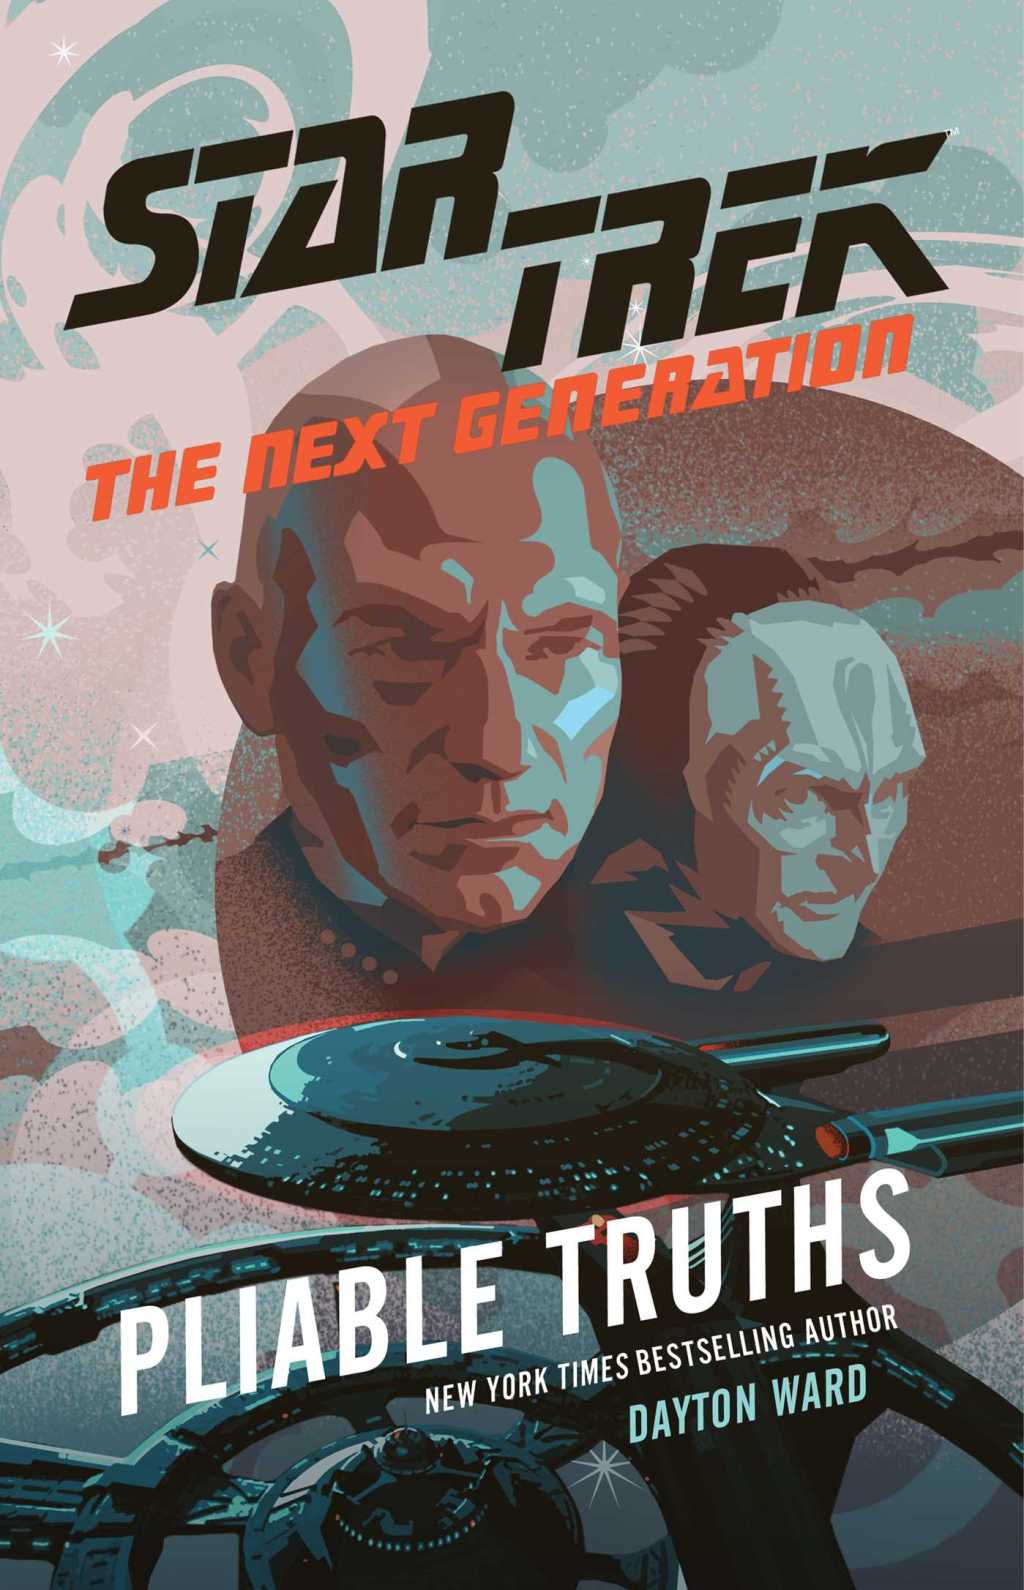 Book Review: Pliable Truths by Dayton Ward (sci-fi)